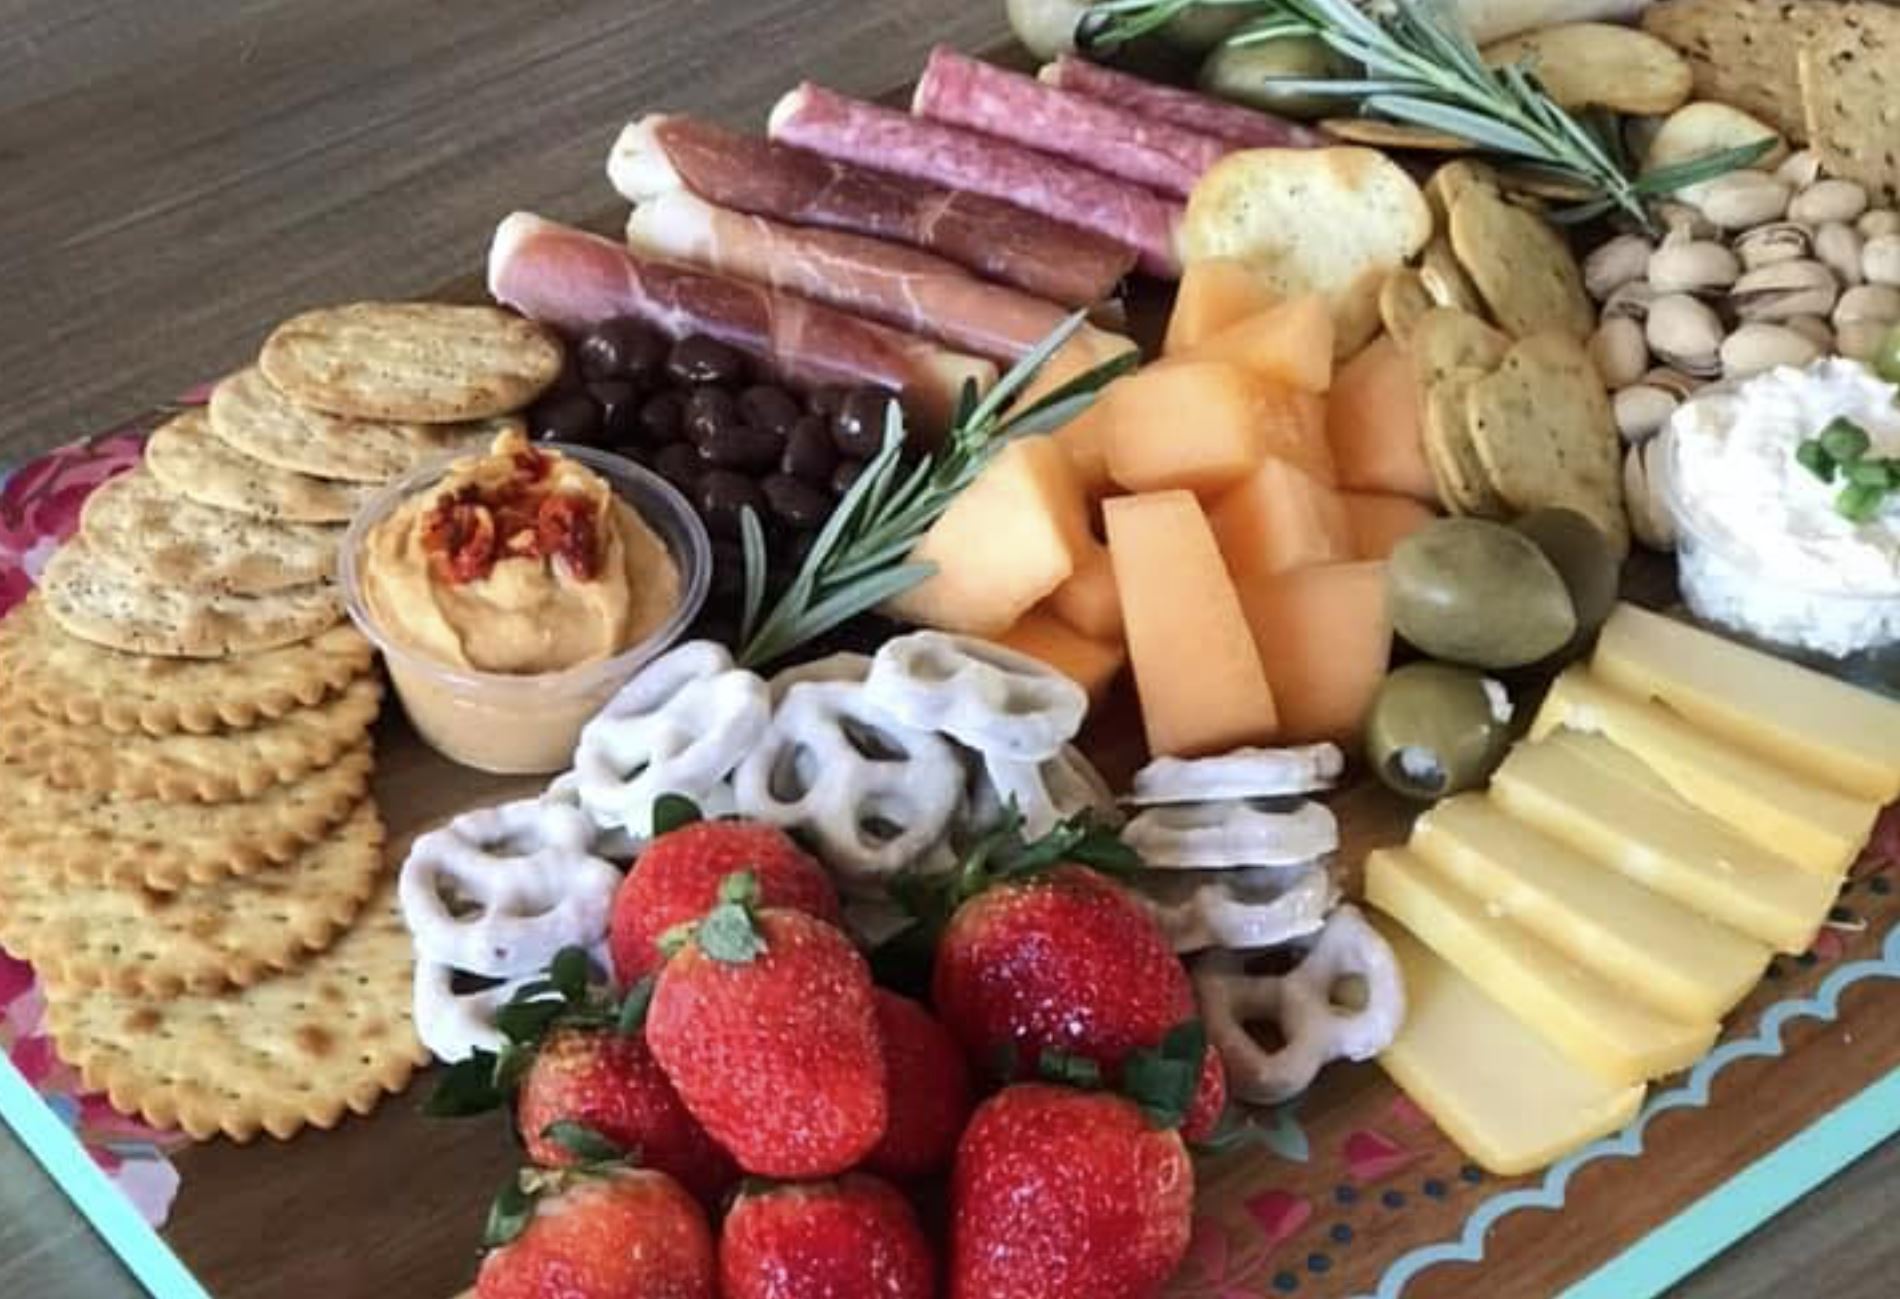 Trussville mom delivering charcuterie boards after inspiration from 8-year-old